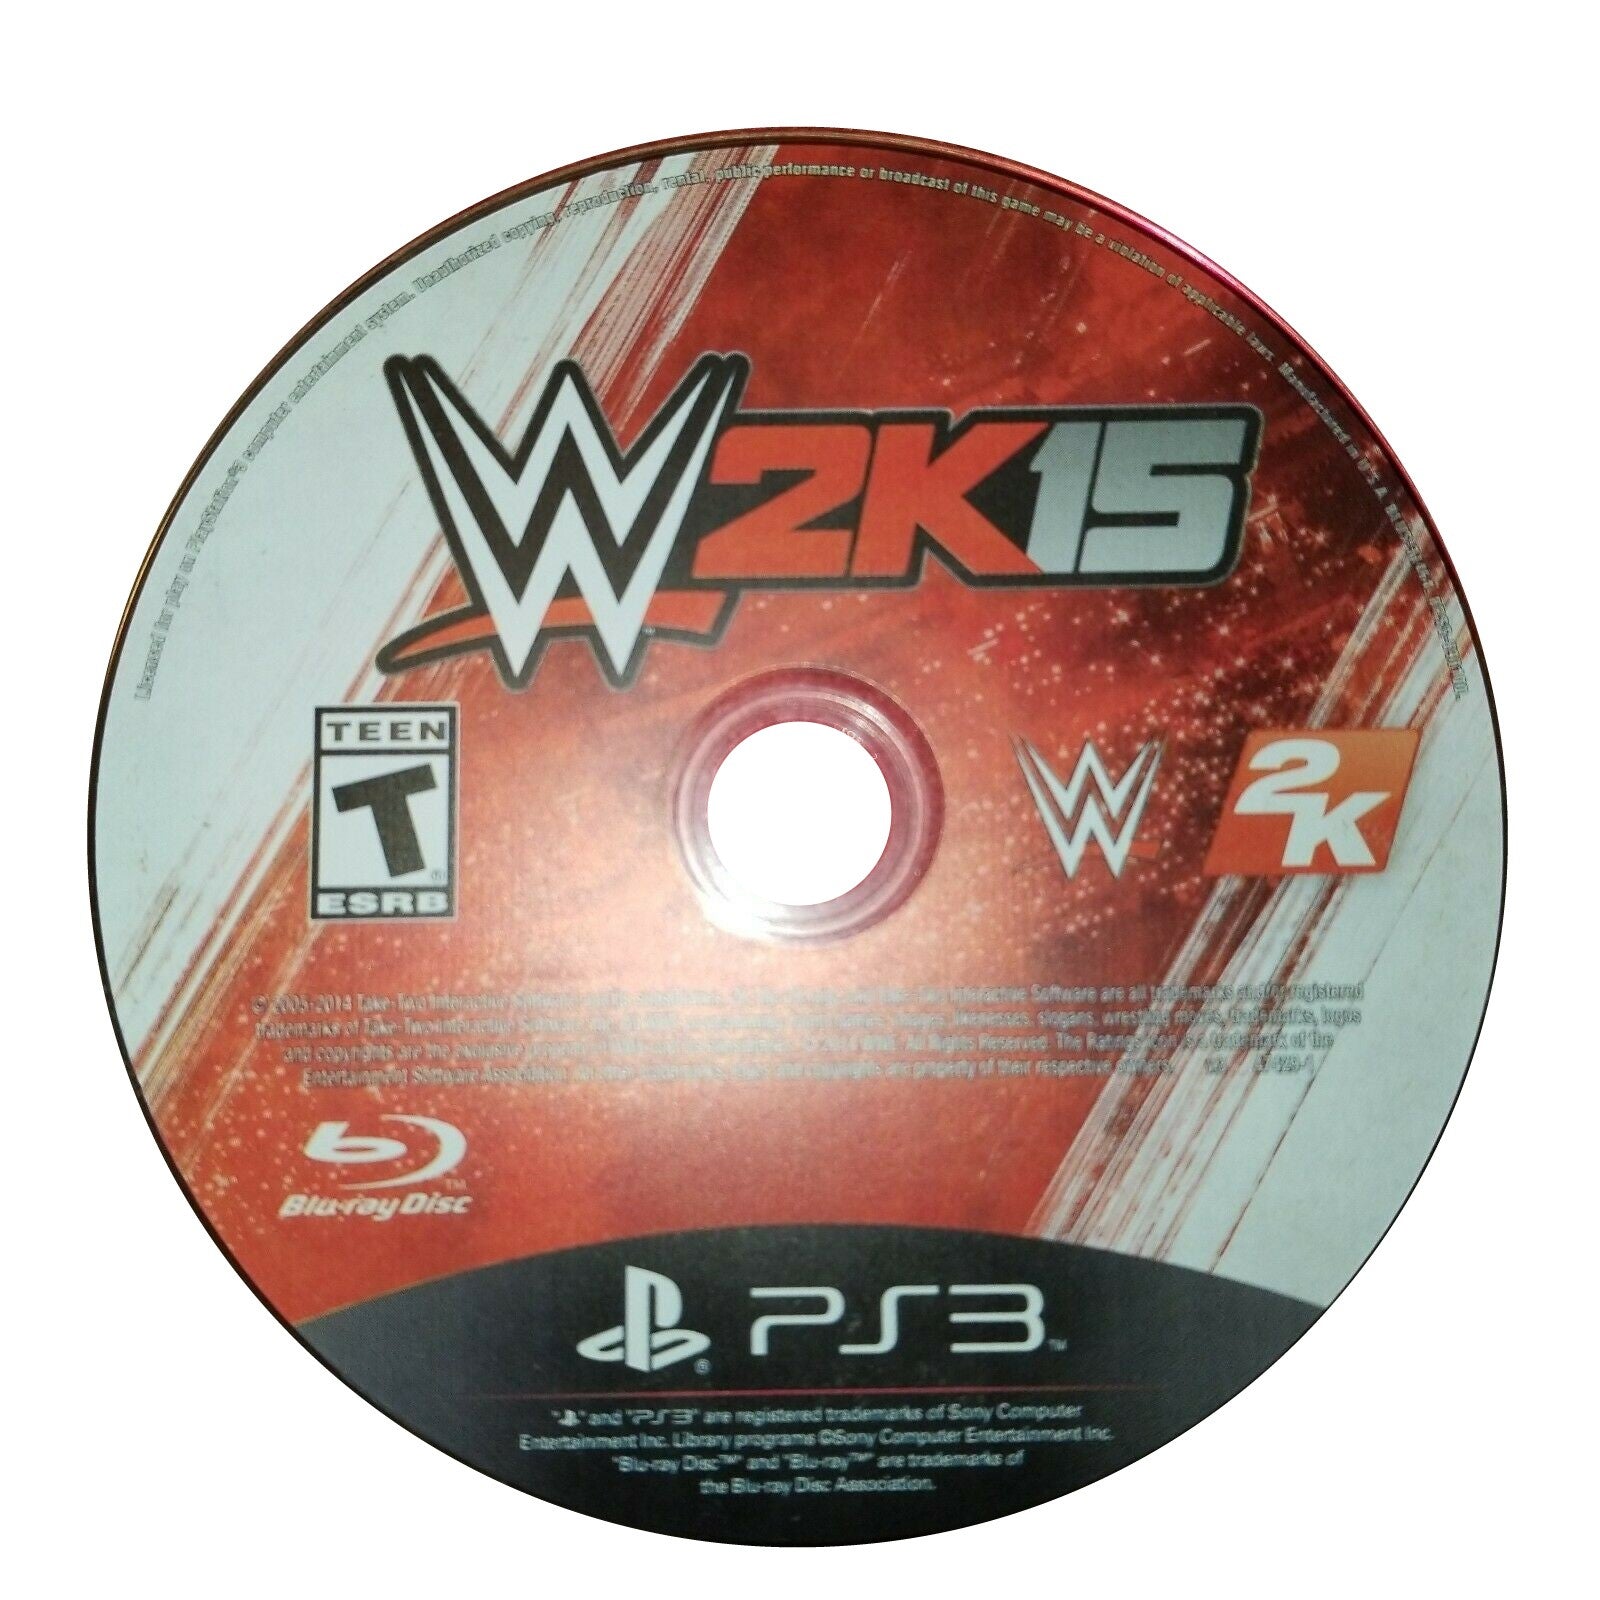 WWE 2K15 - PlayStation 3 (PS3) Game